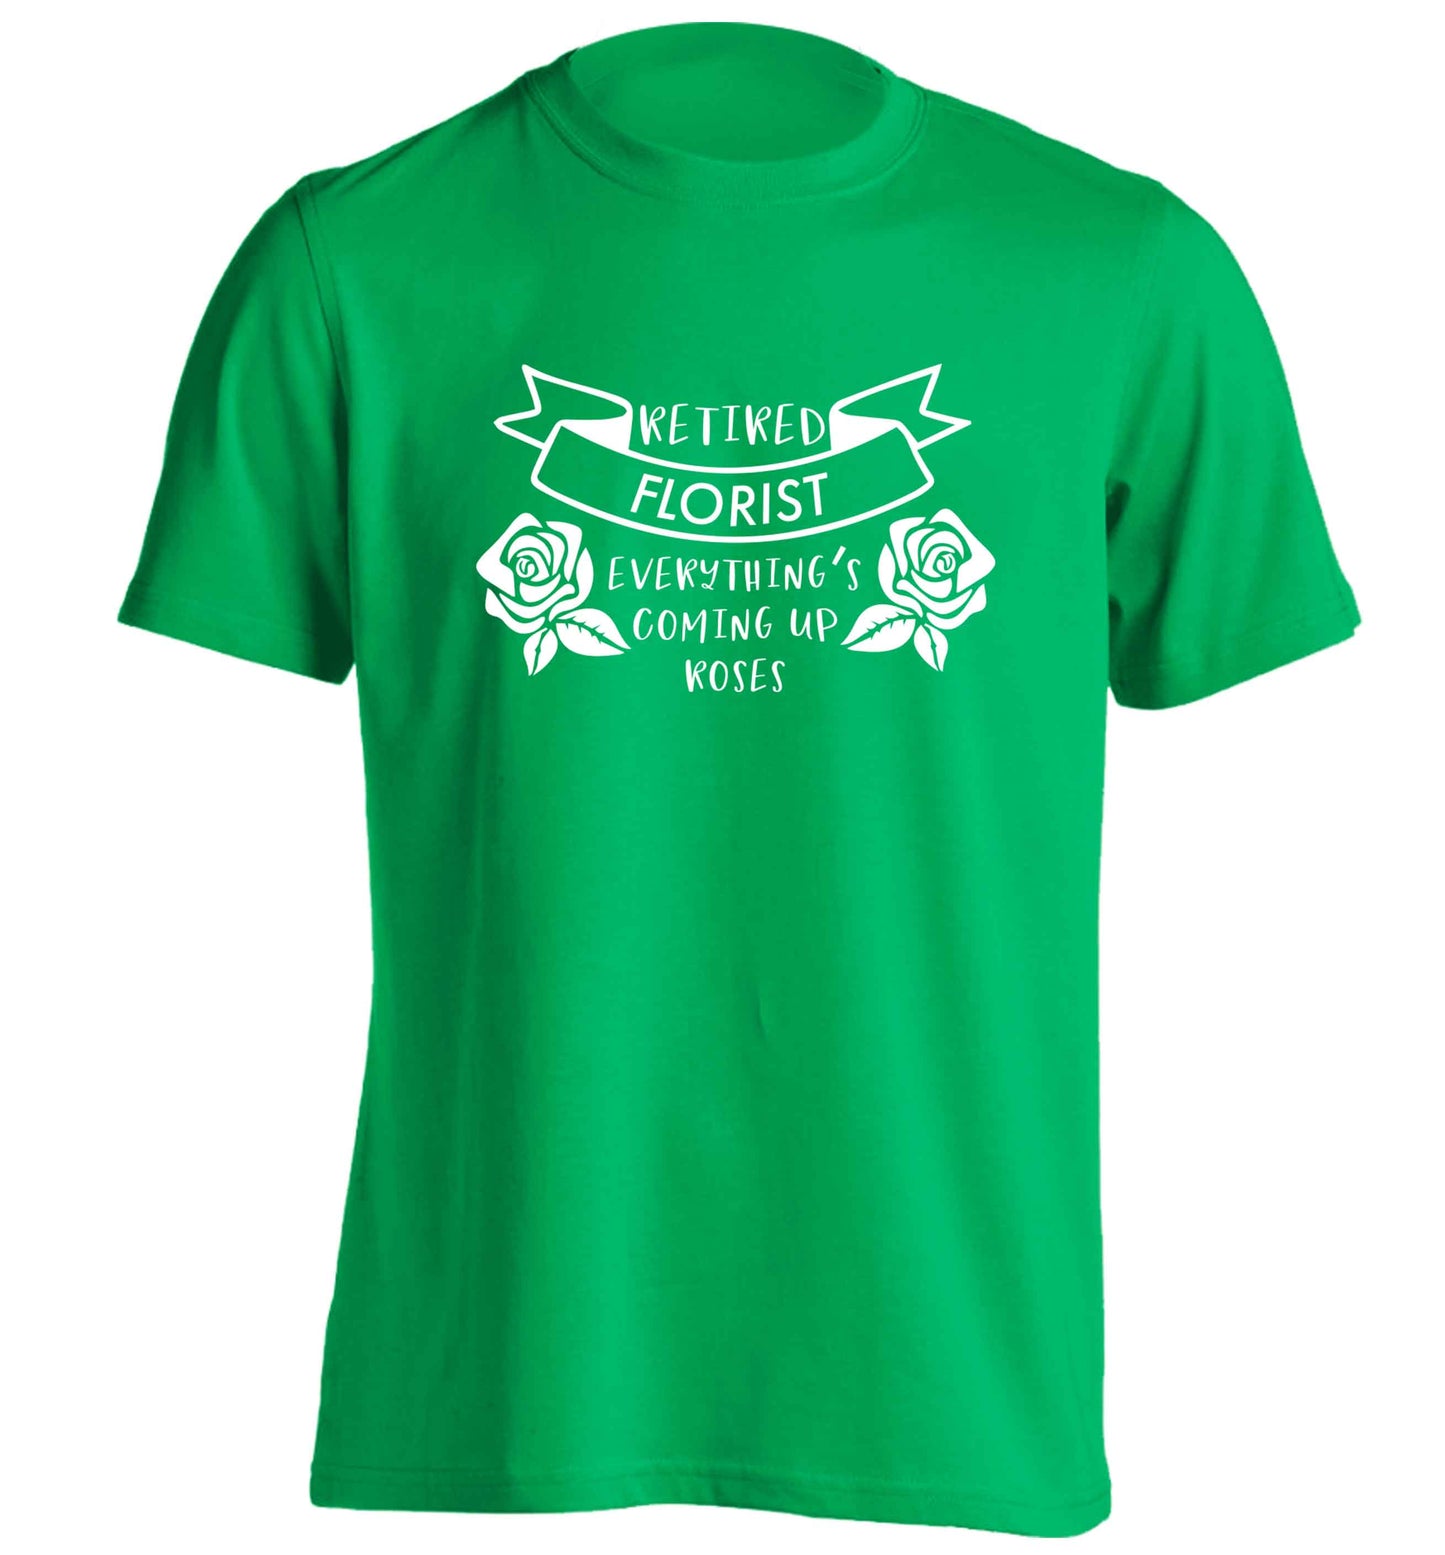 Retired florist everything's coming up roses adults unisex green Tshirt 2XL